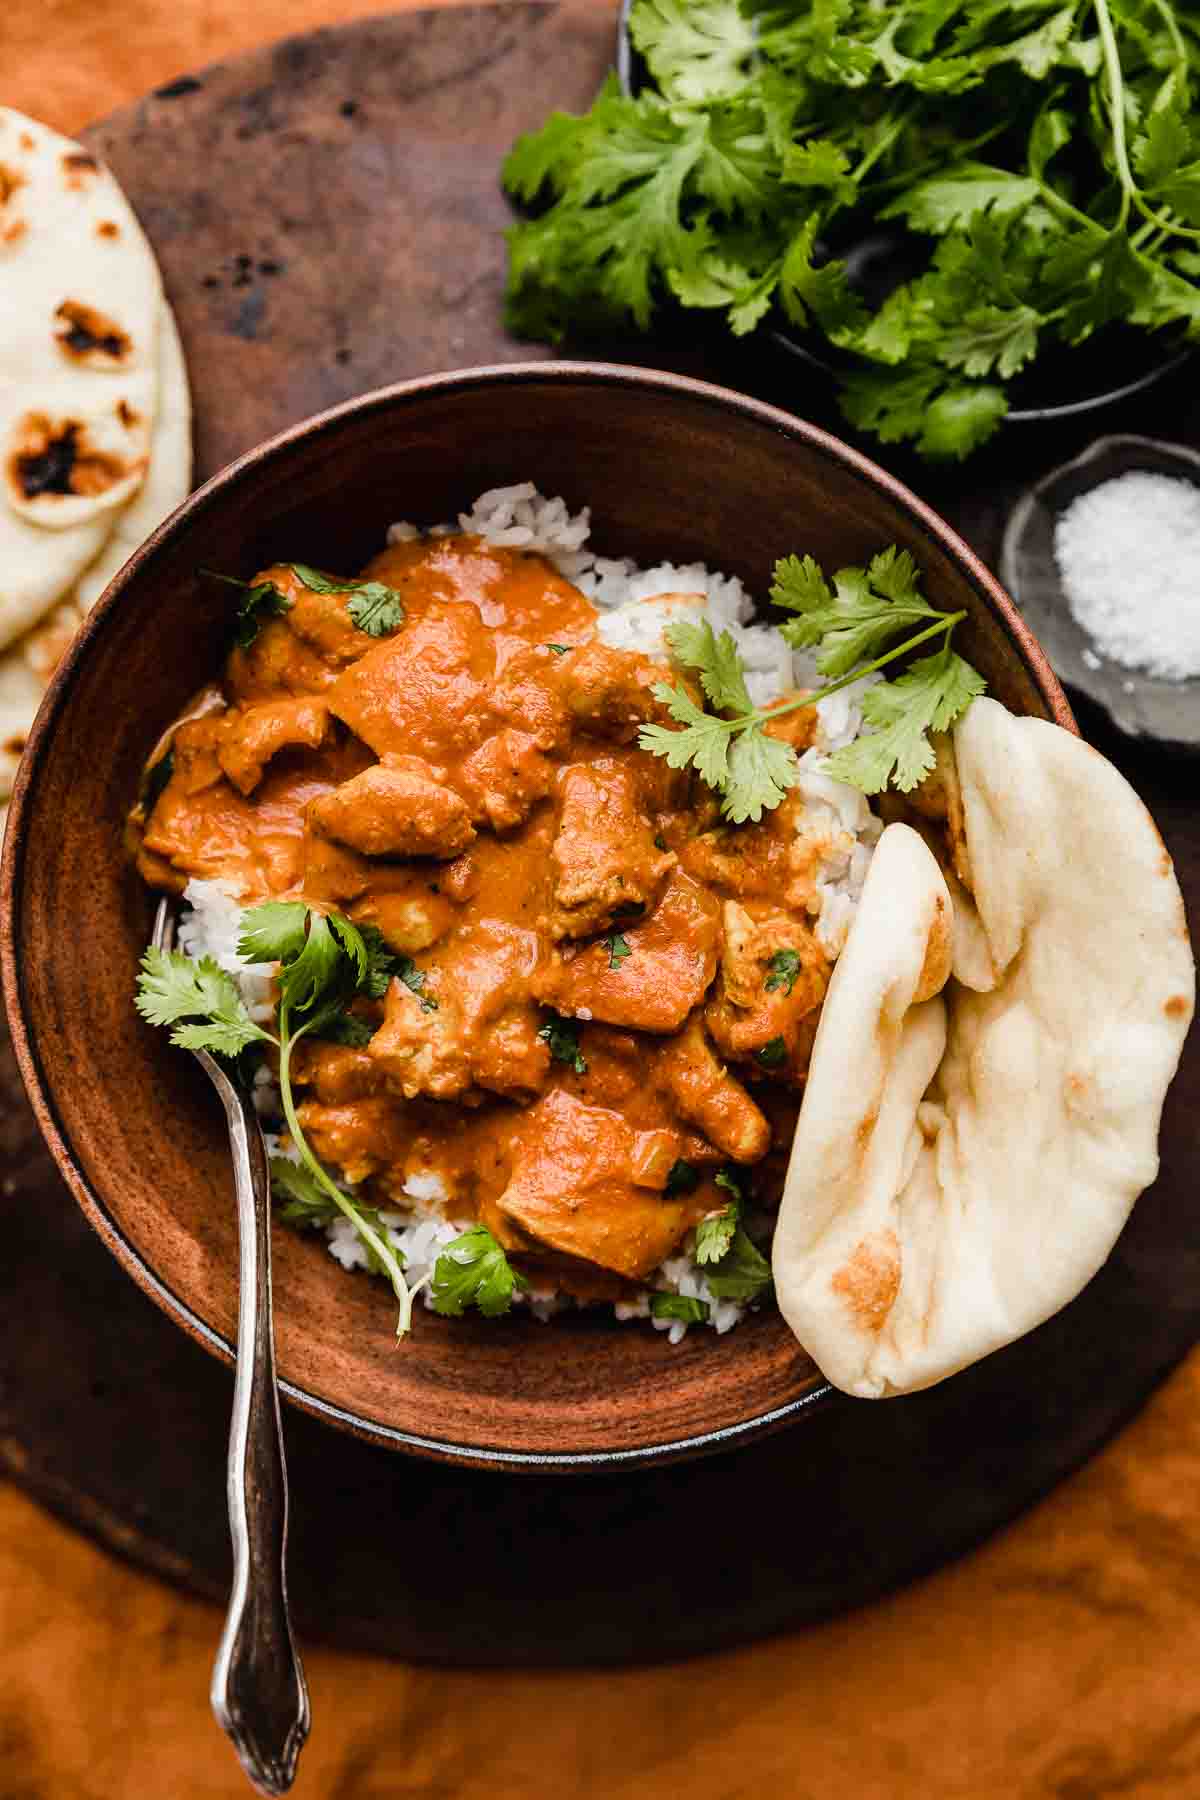 Chicken Tikka Masala recipe overtop rice with a side of naan, on a brown and deep orange colored background.